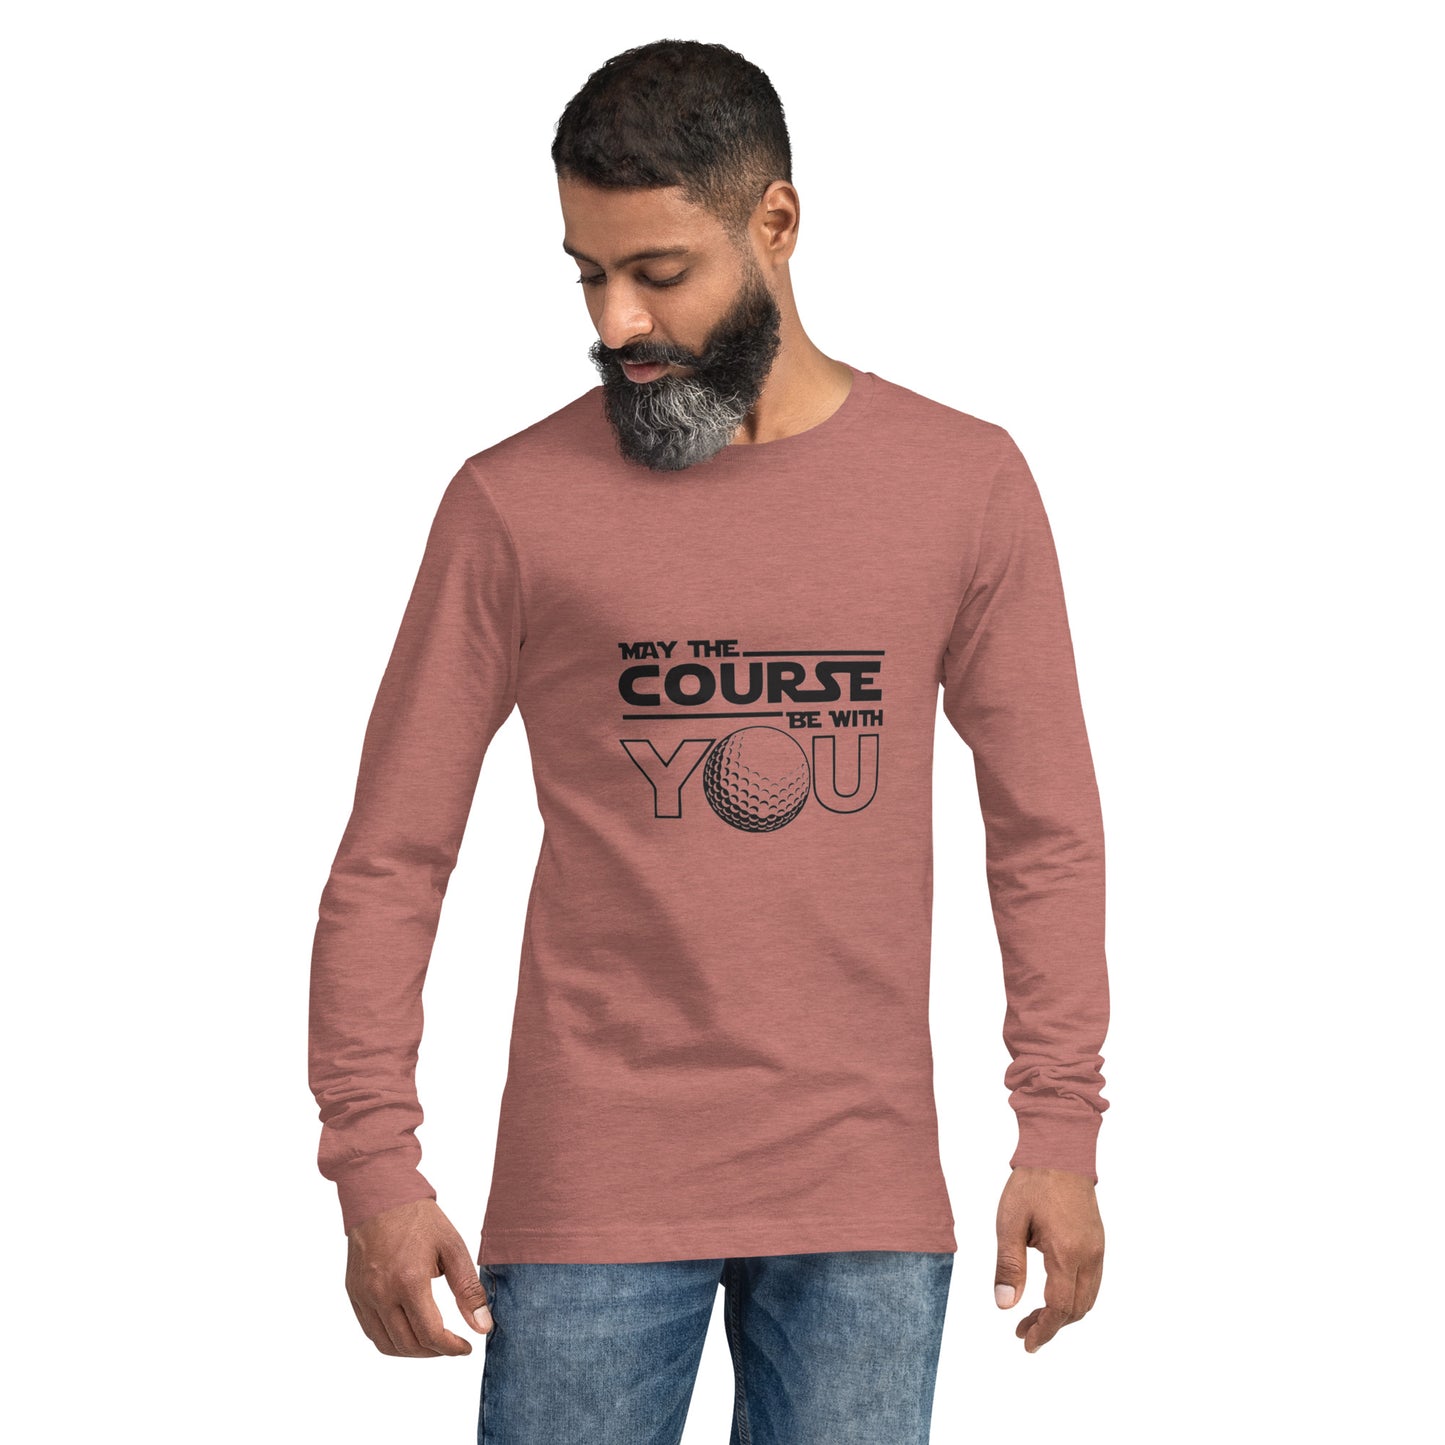 May The Course Be With You Long Sleeve Shirt